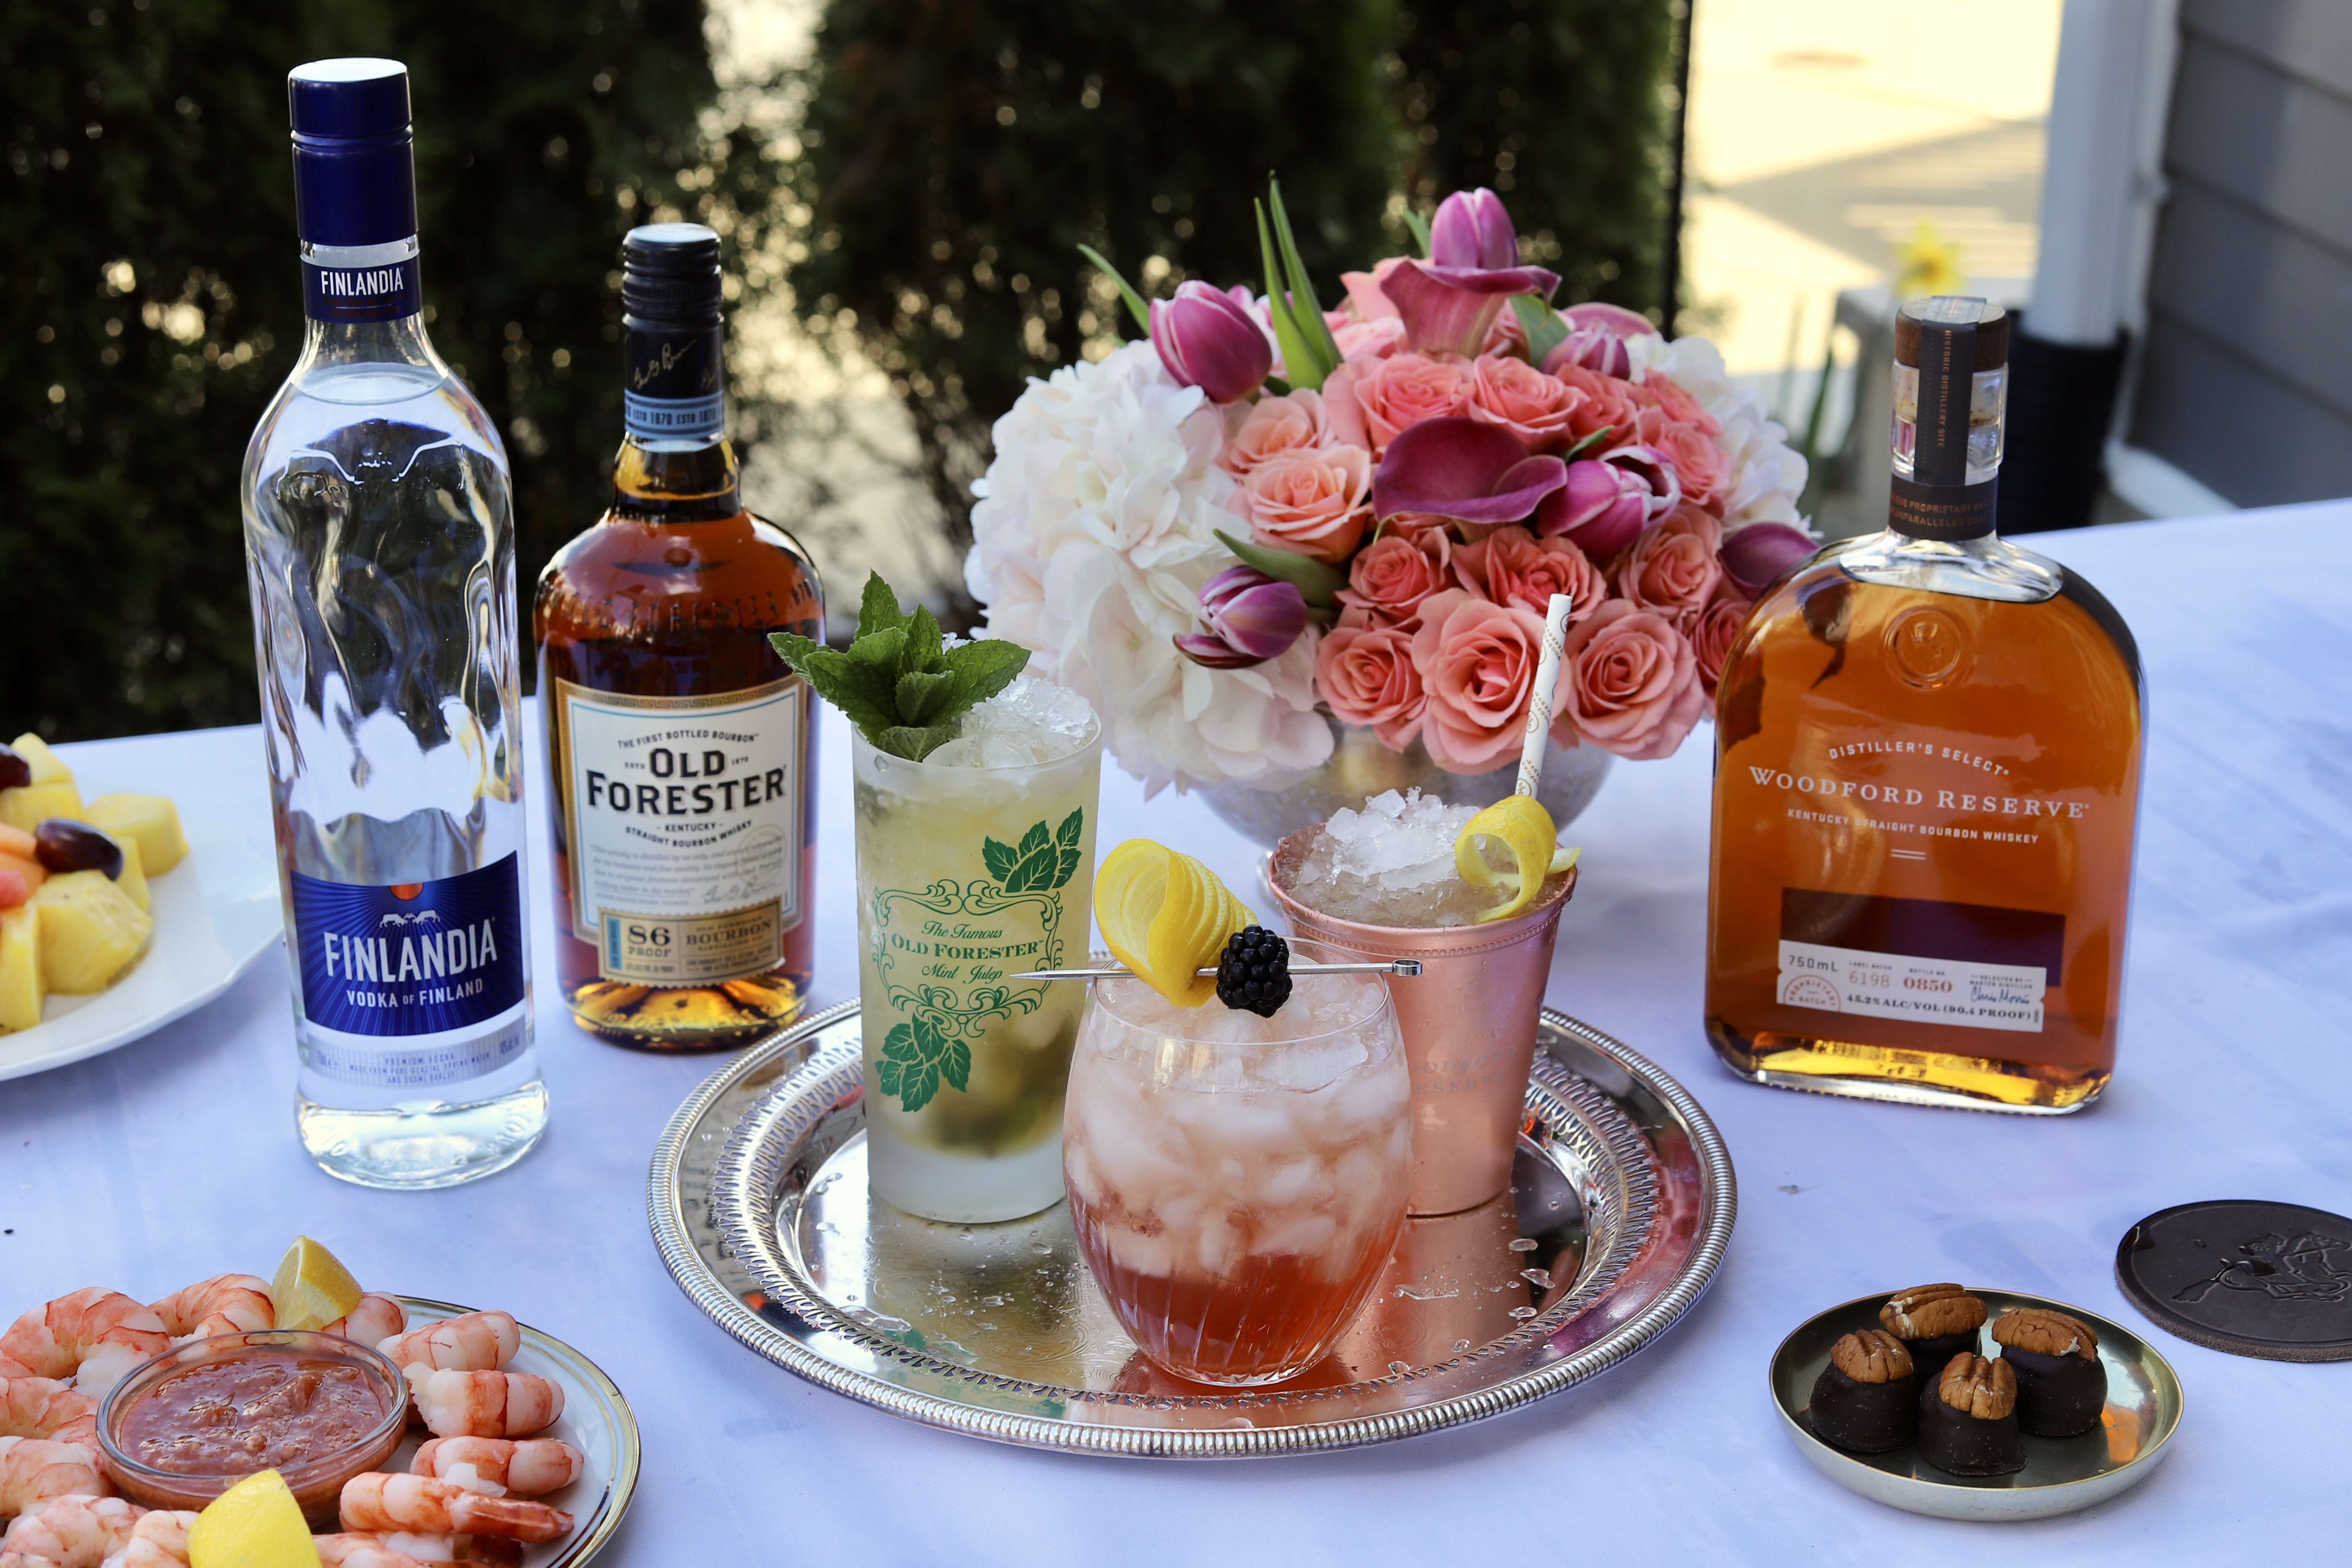 Kentucky Derby Cocktails with Woodford Reserve, Old Forester, and Finlandia